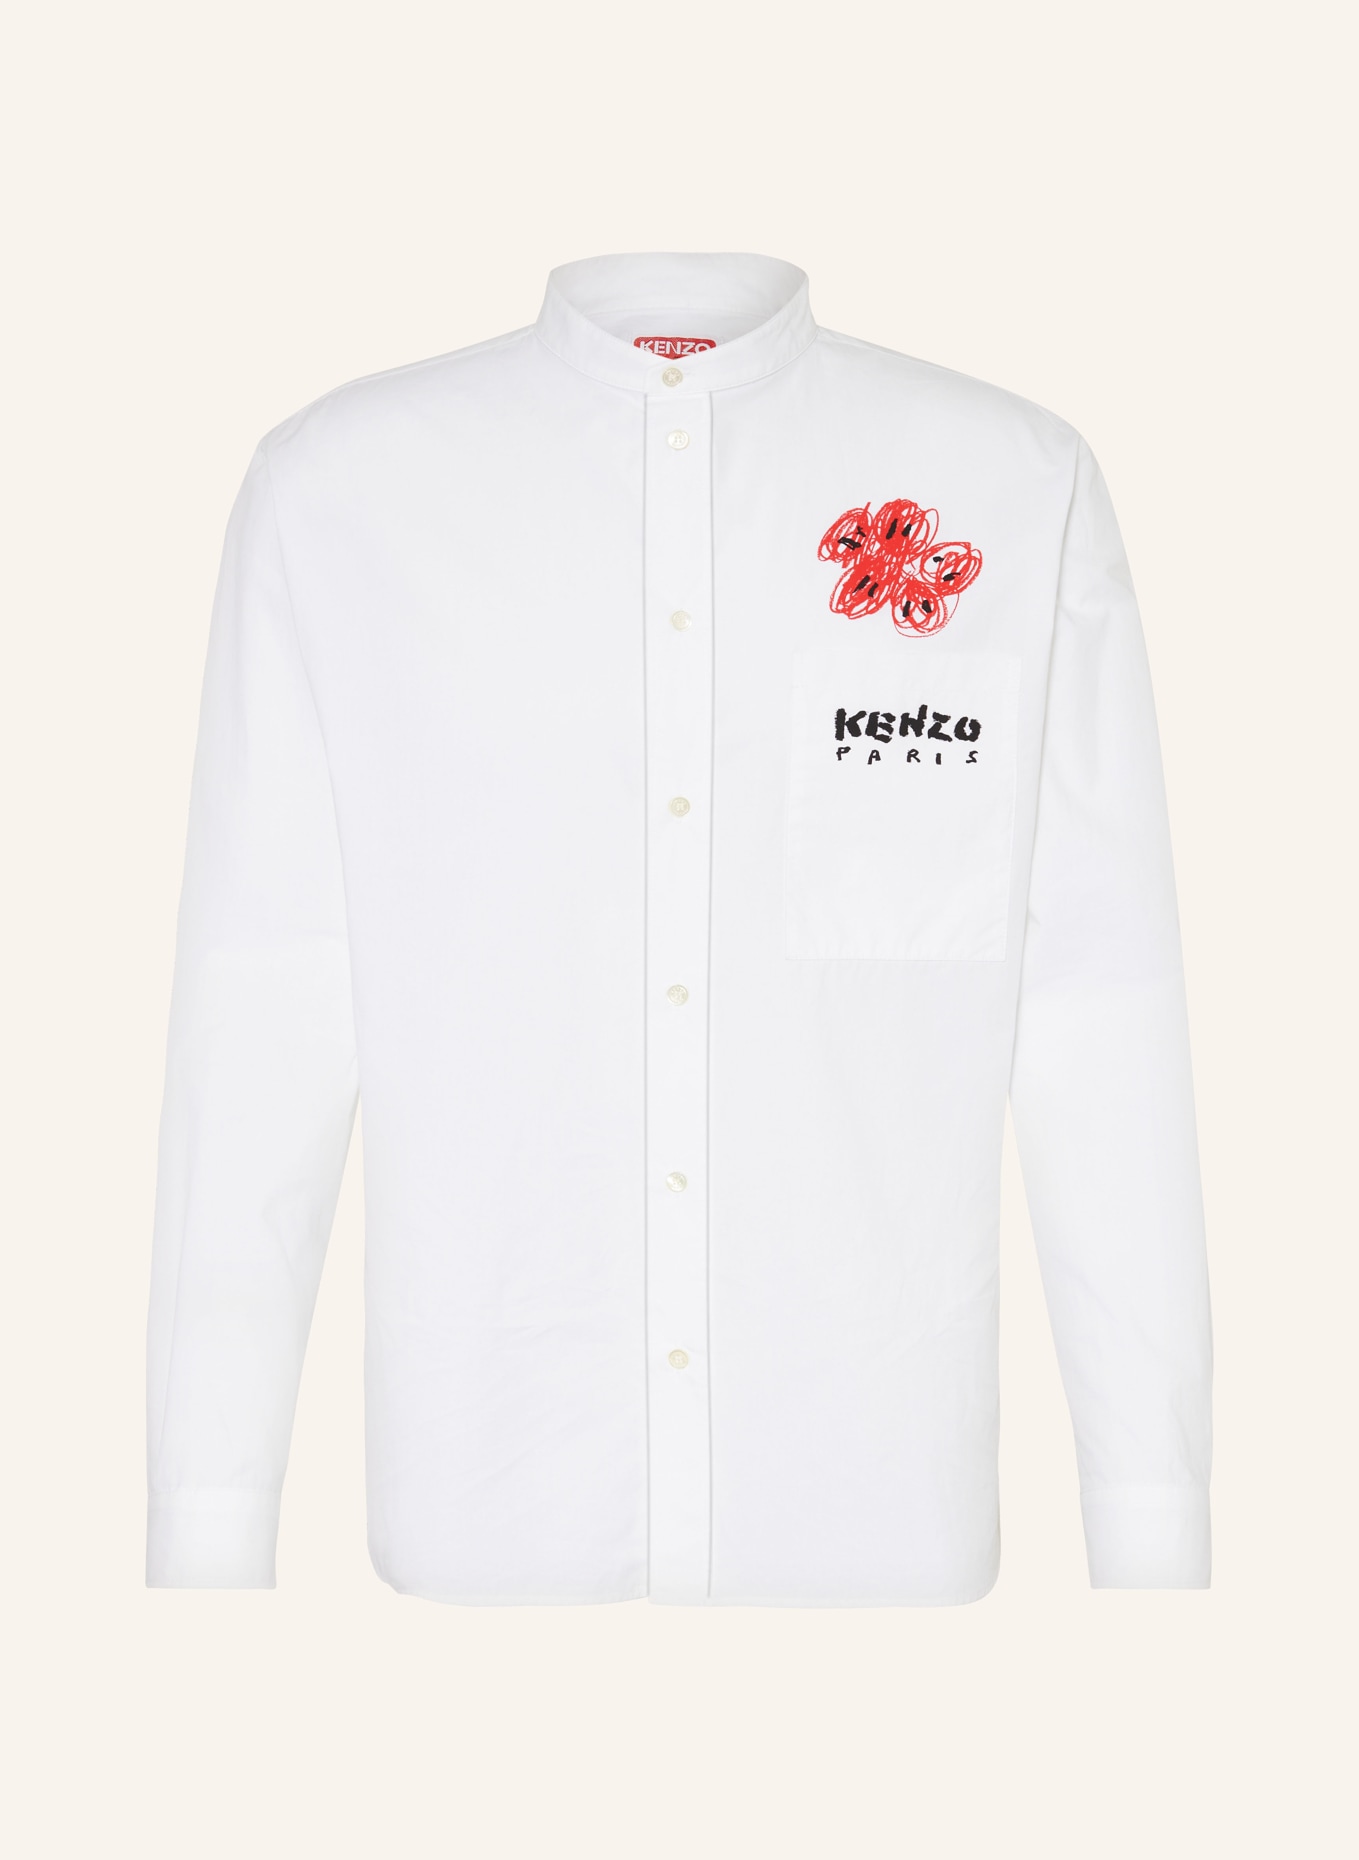 KENZO Shirt regular fit with stand-up collar, Color: WHITE/ RED/ BLACK (Image 1)